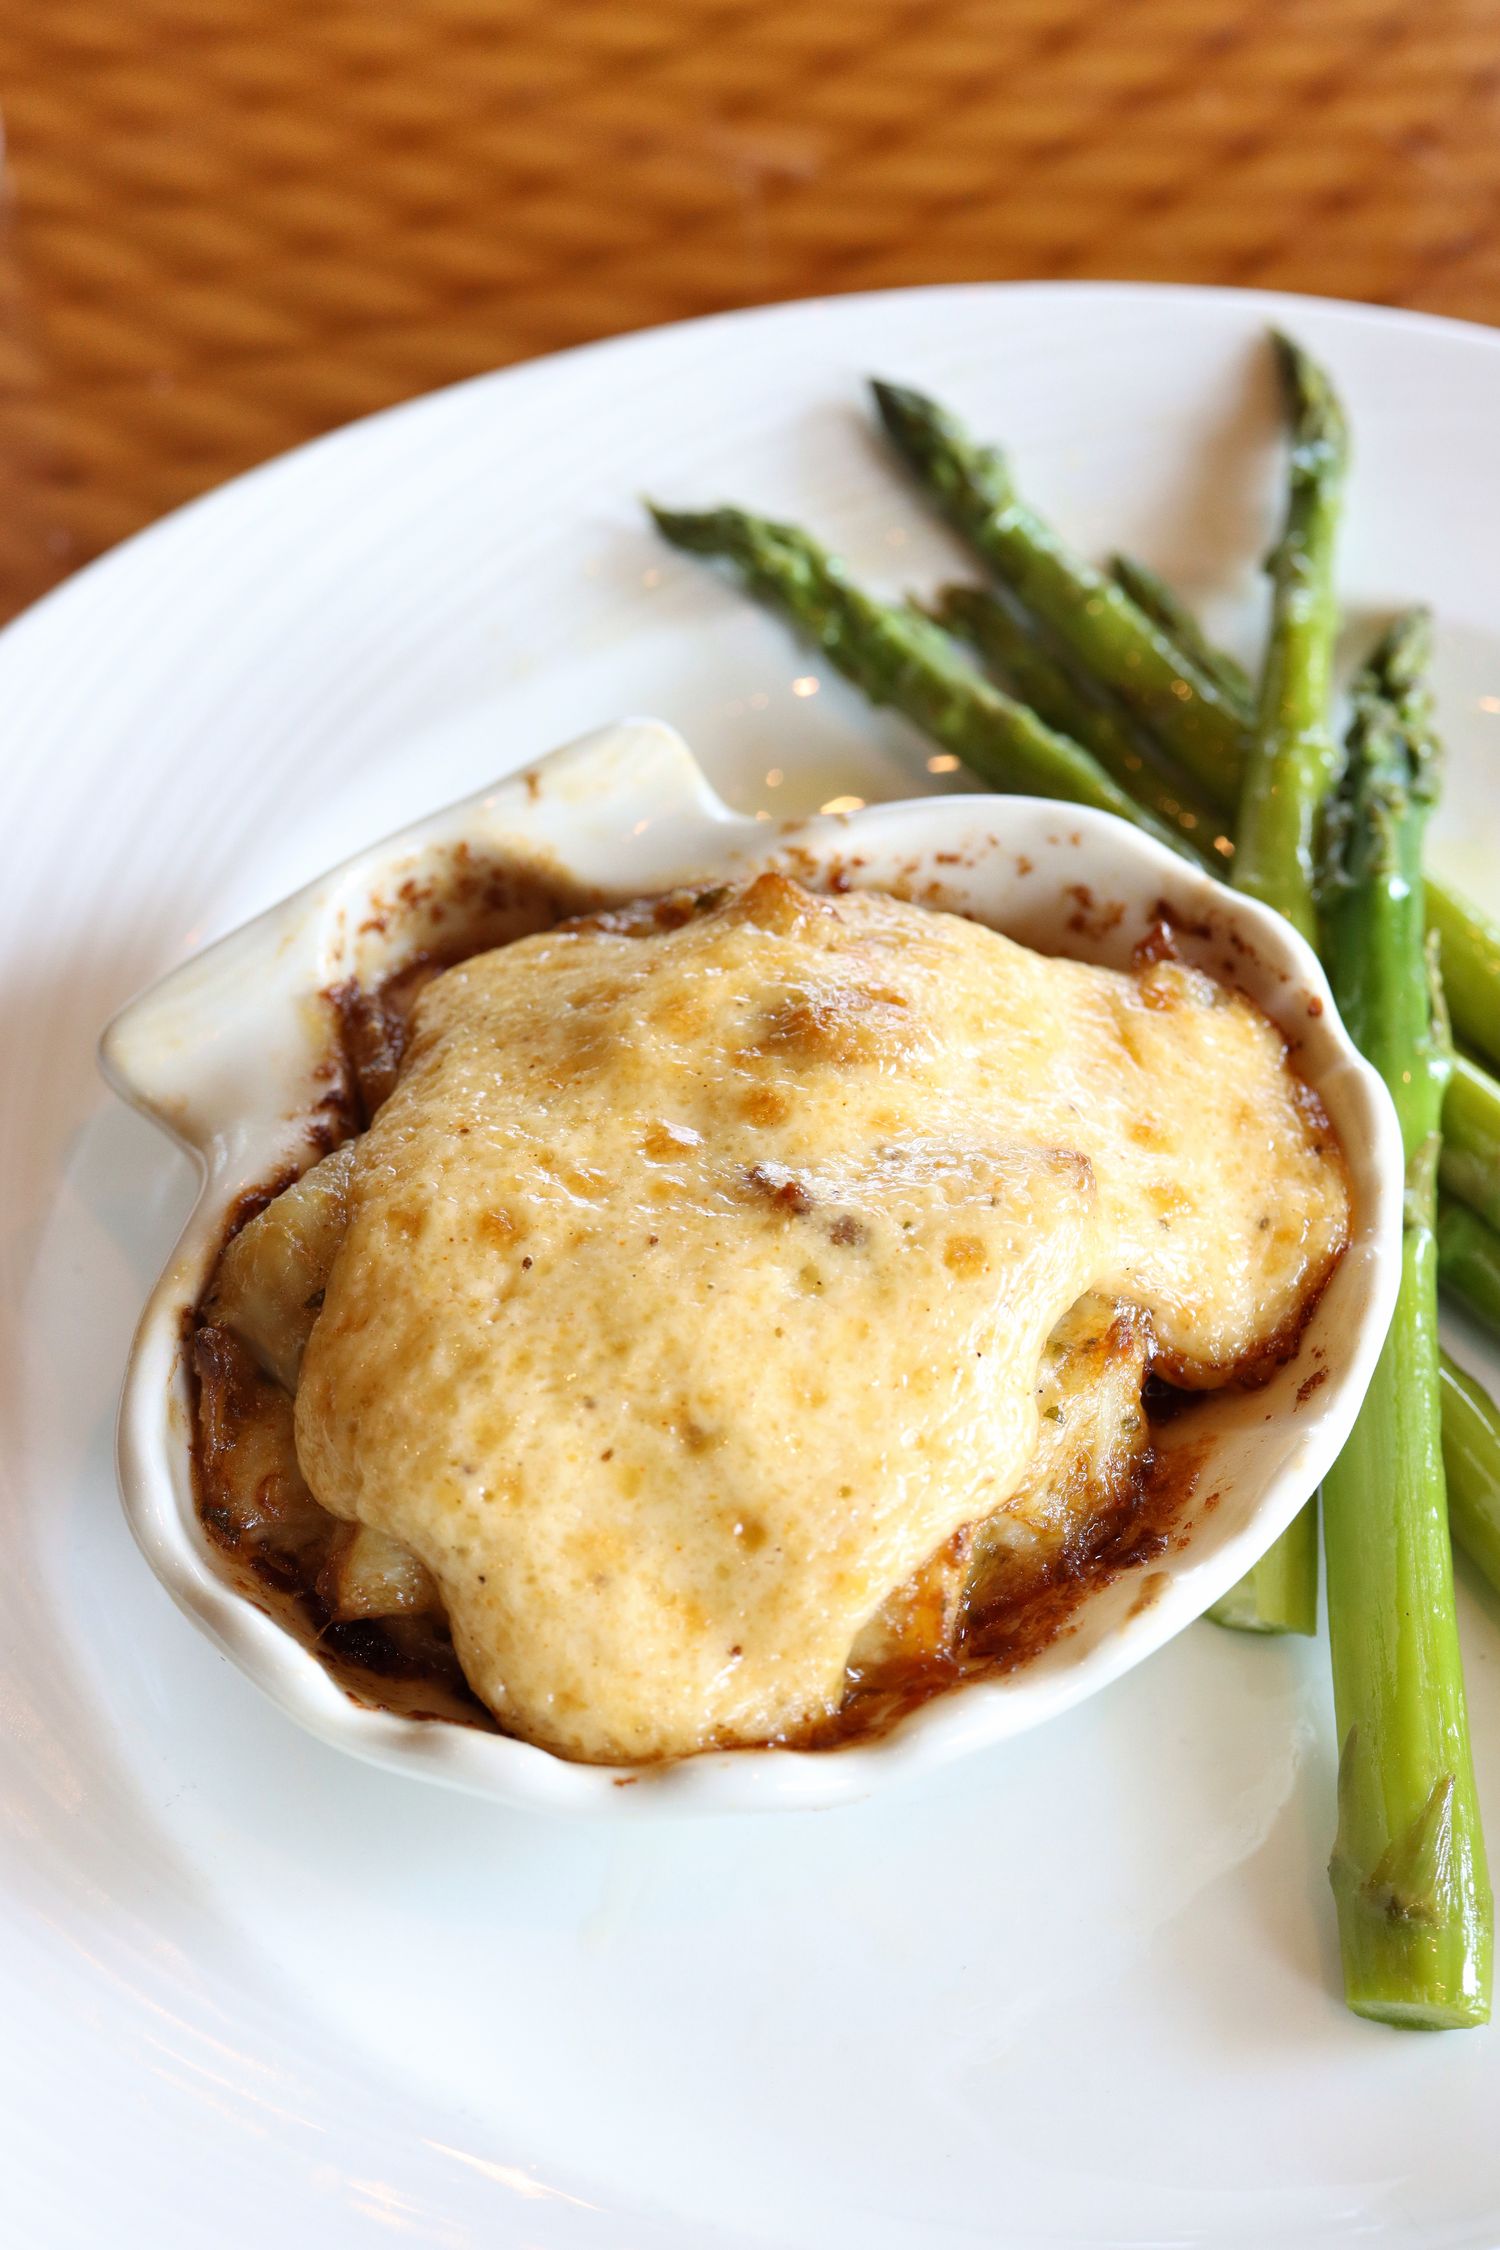 Baked Jumbo Lump Crab Imperial features sweet and meaty lump crab topped with their rich and luxurious imperial sauce.